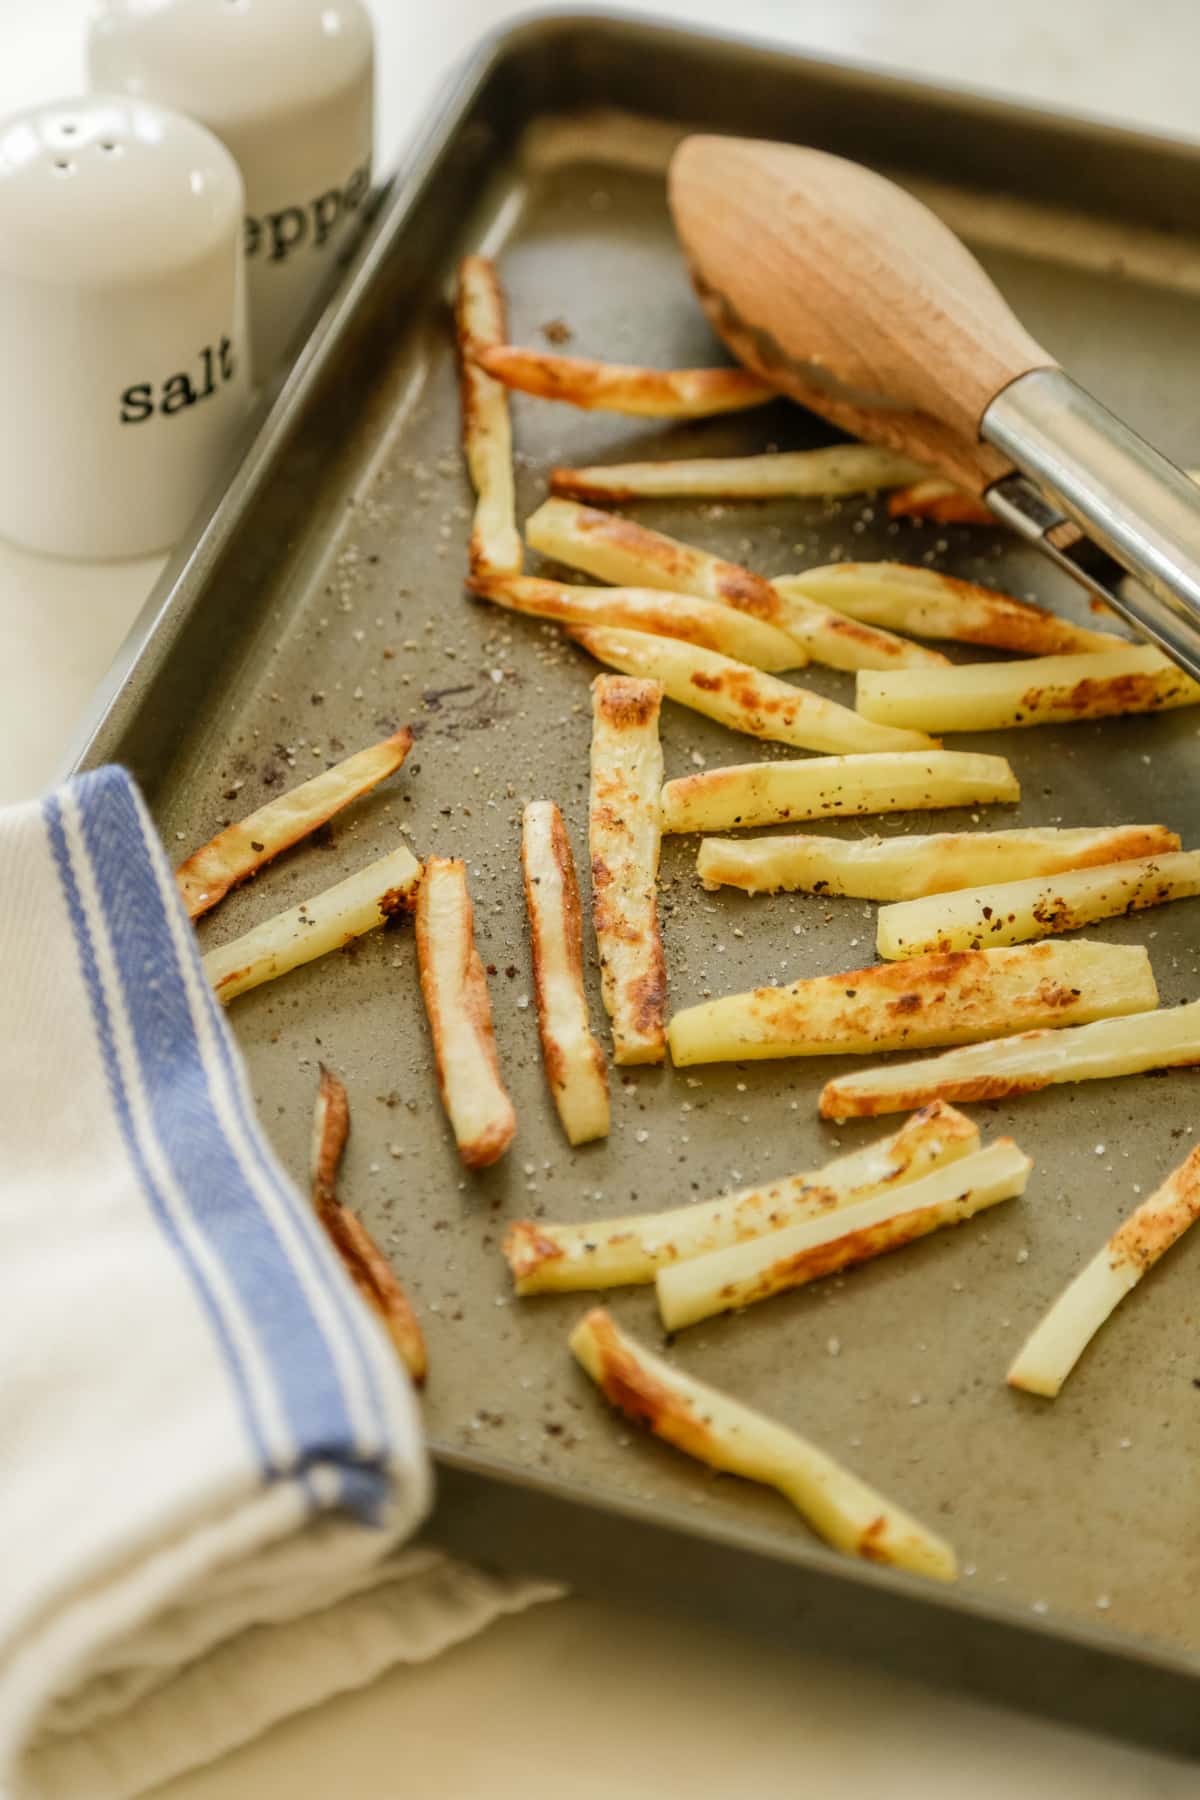 A baking sheet with french fries.